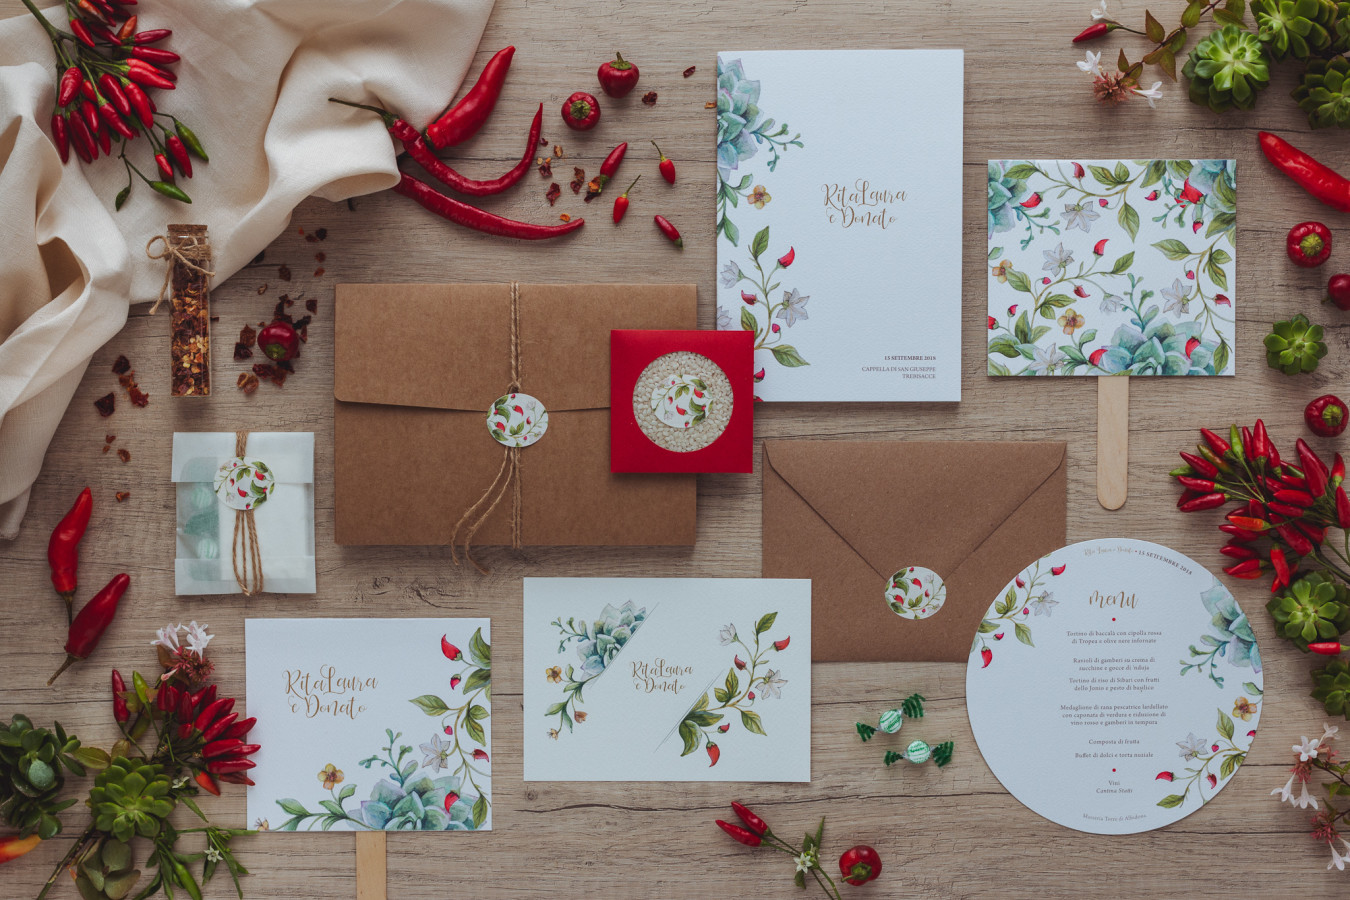 Wedding stationery • Wedsign by Scura Design